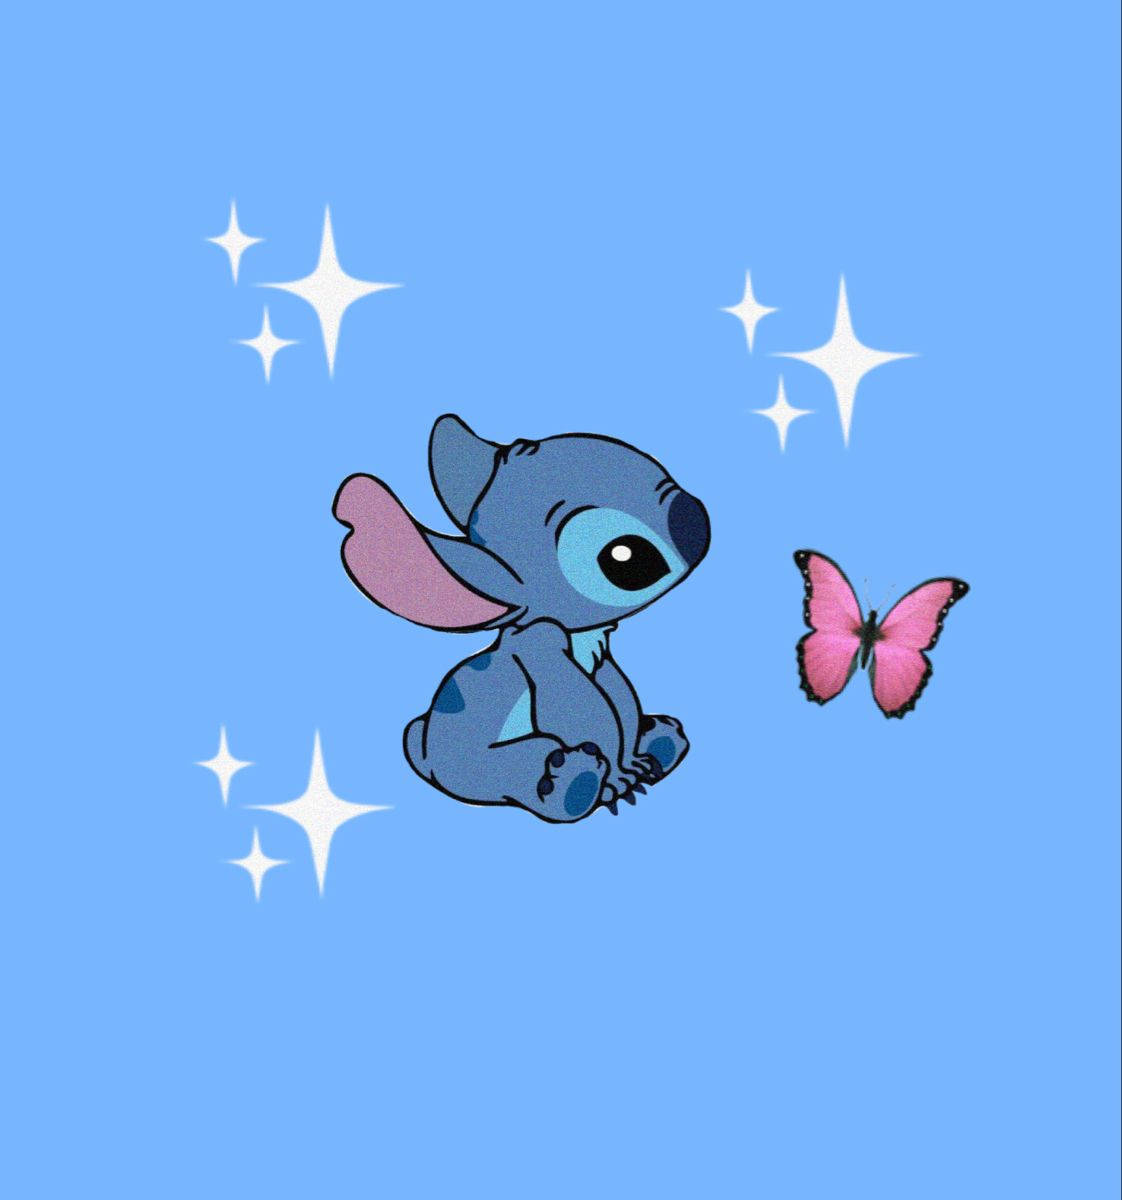 Download Cute Stitch With Pink Butterfly Wallpaper | Wallpapers.com